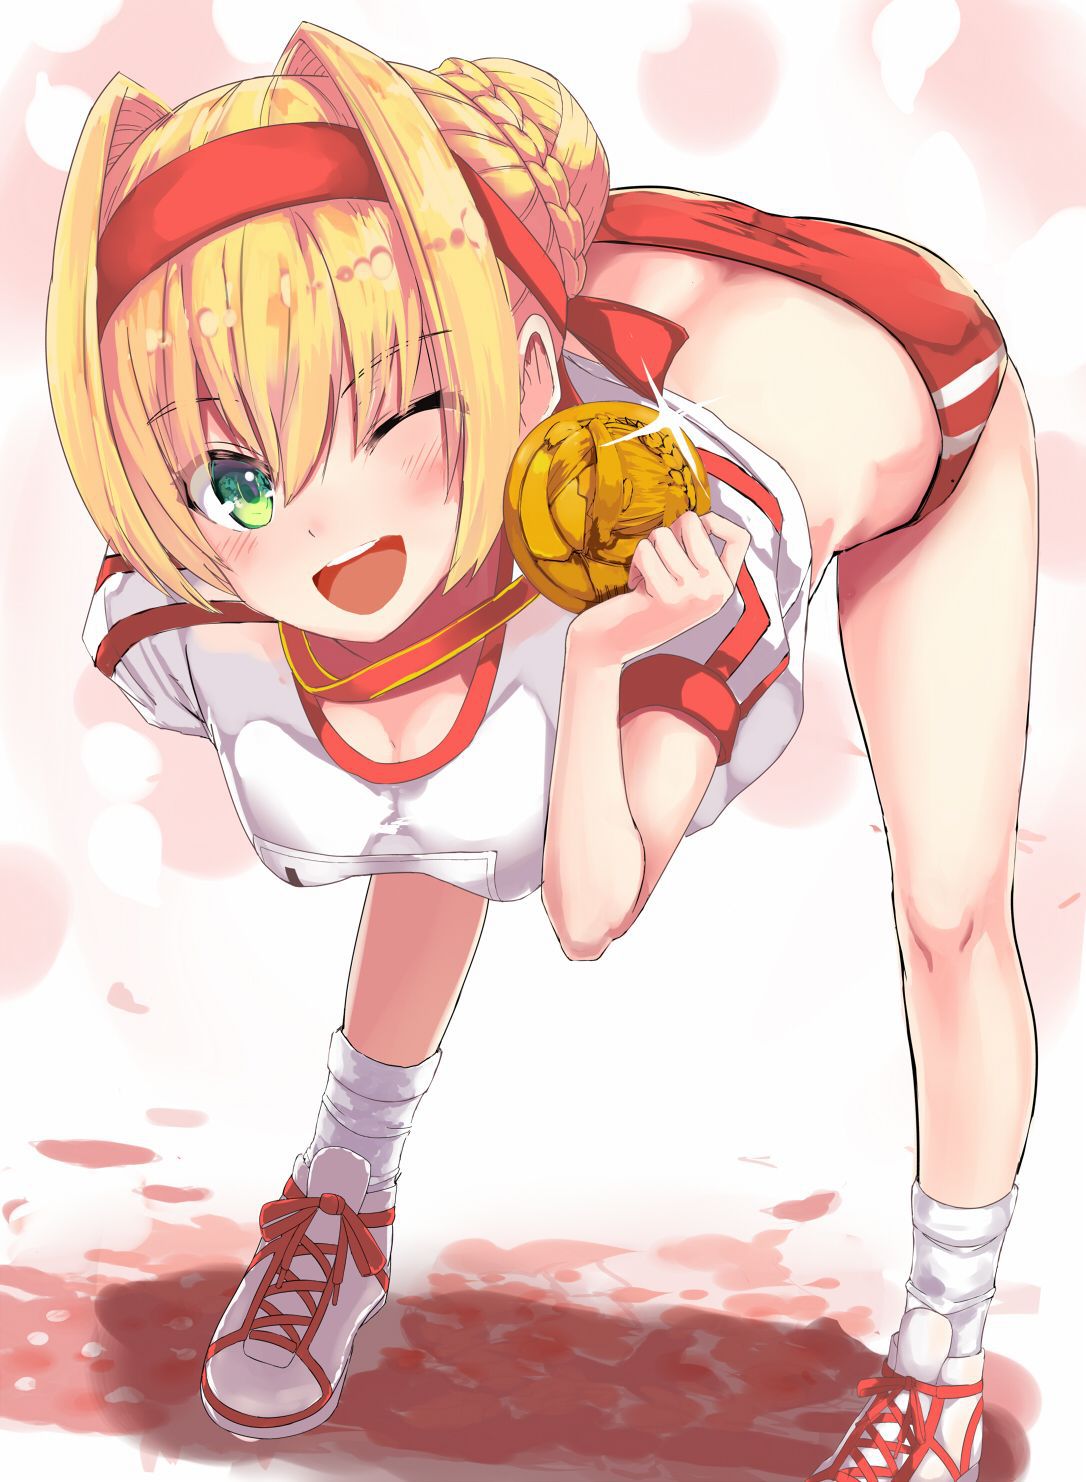 [Secondary ZIP] is about to start anime 100 pieces of cute image summary of Nero Claudius so soon 24